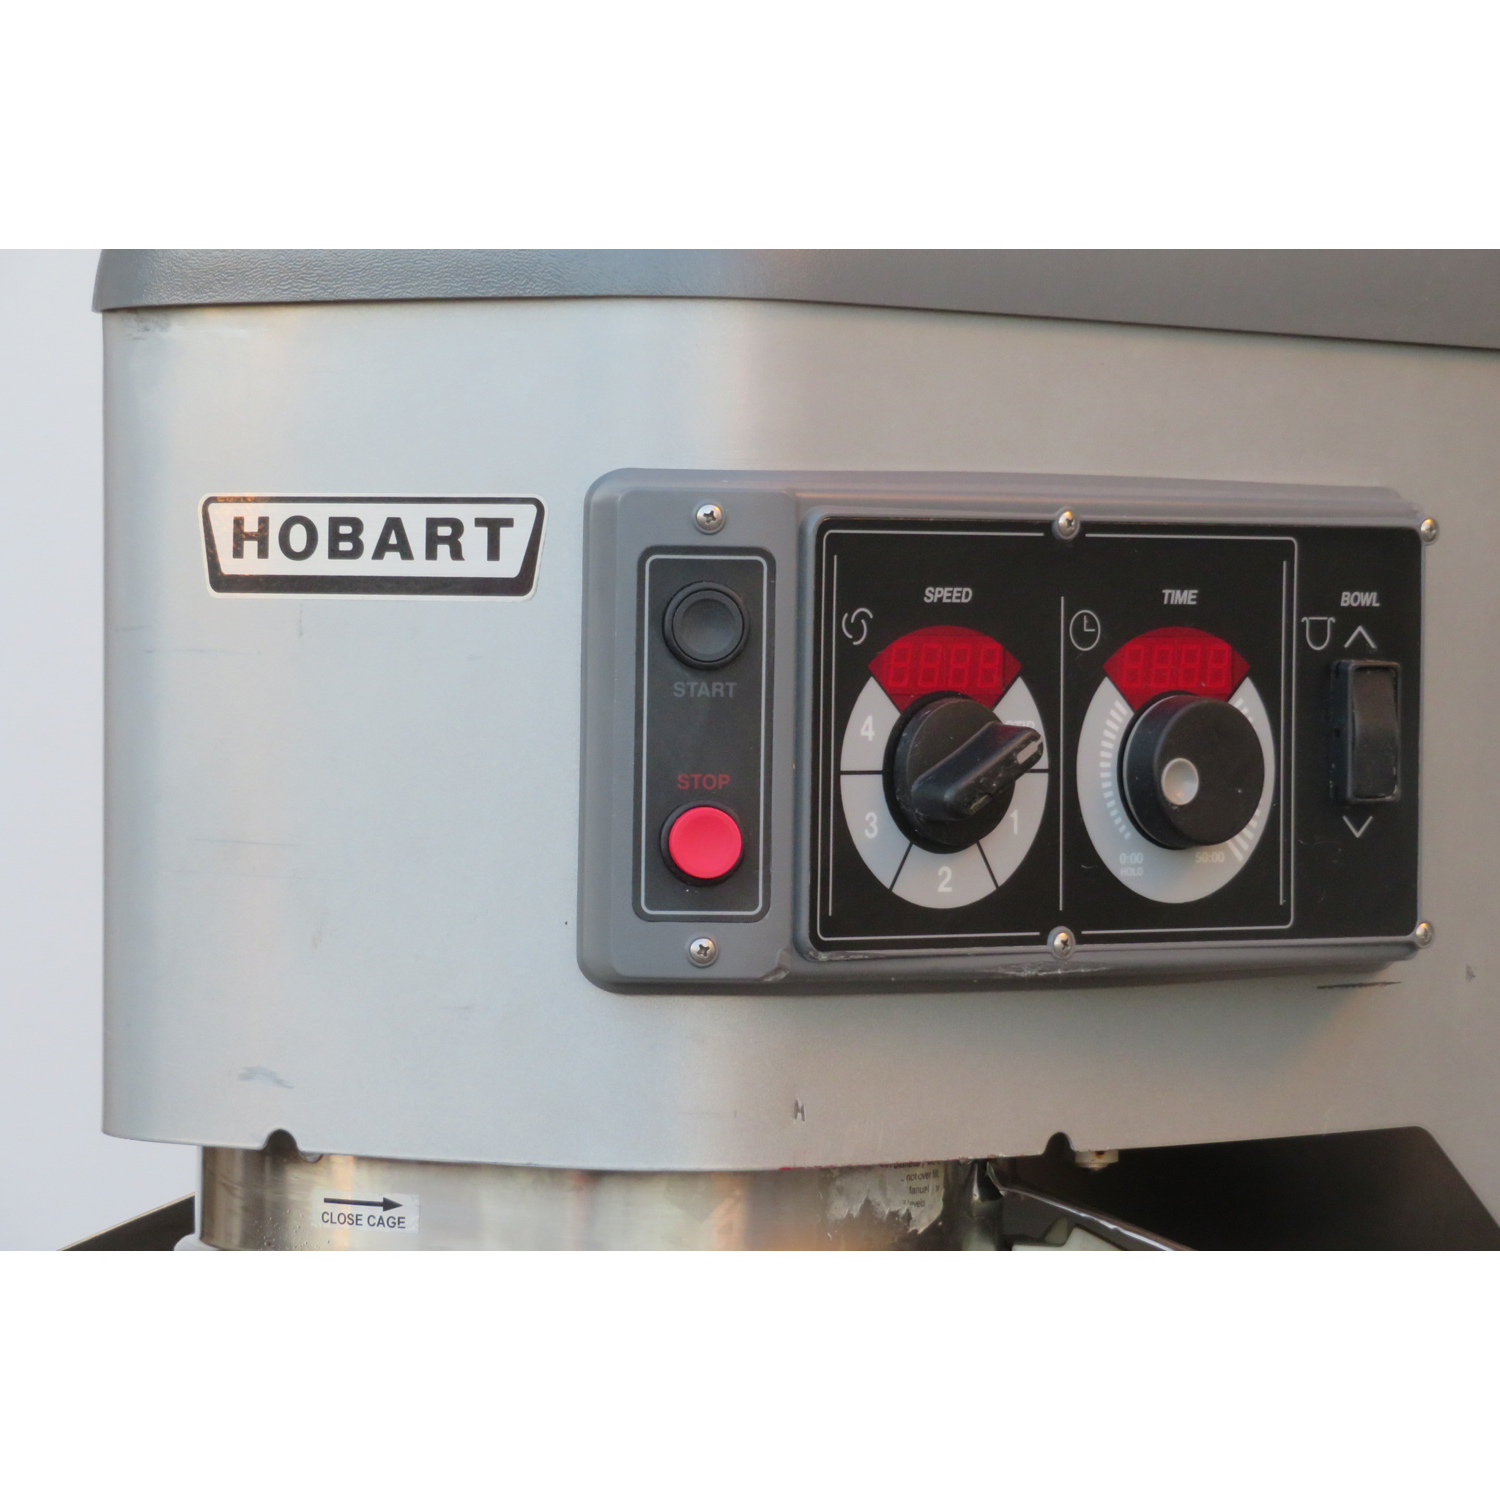 Hobart HL800 Legacy 80 Quart Mixer, Used Great Condition image 1